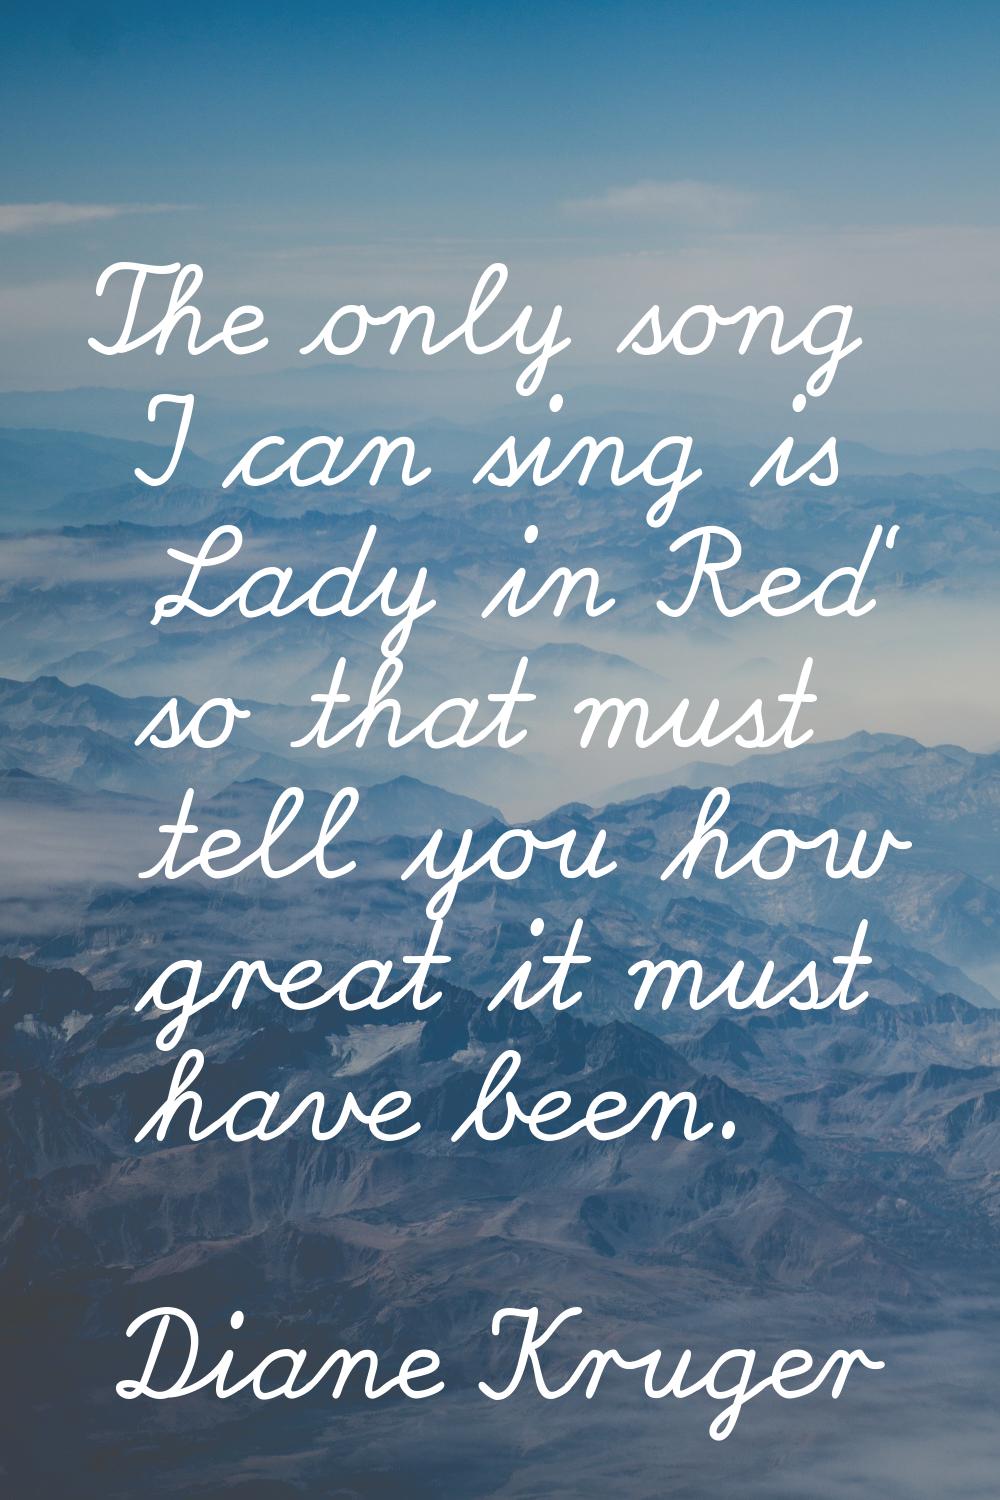 The only song I can sing is 'Lady in Red' so that must tell you how great it must have been.